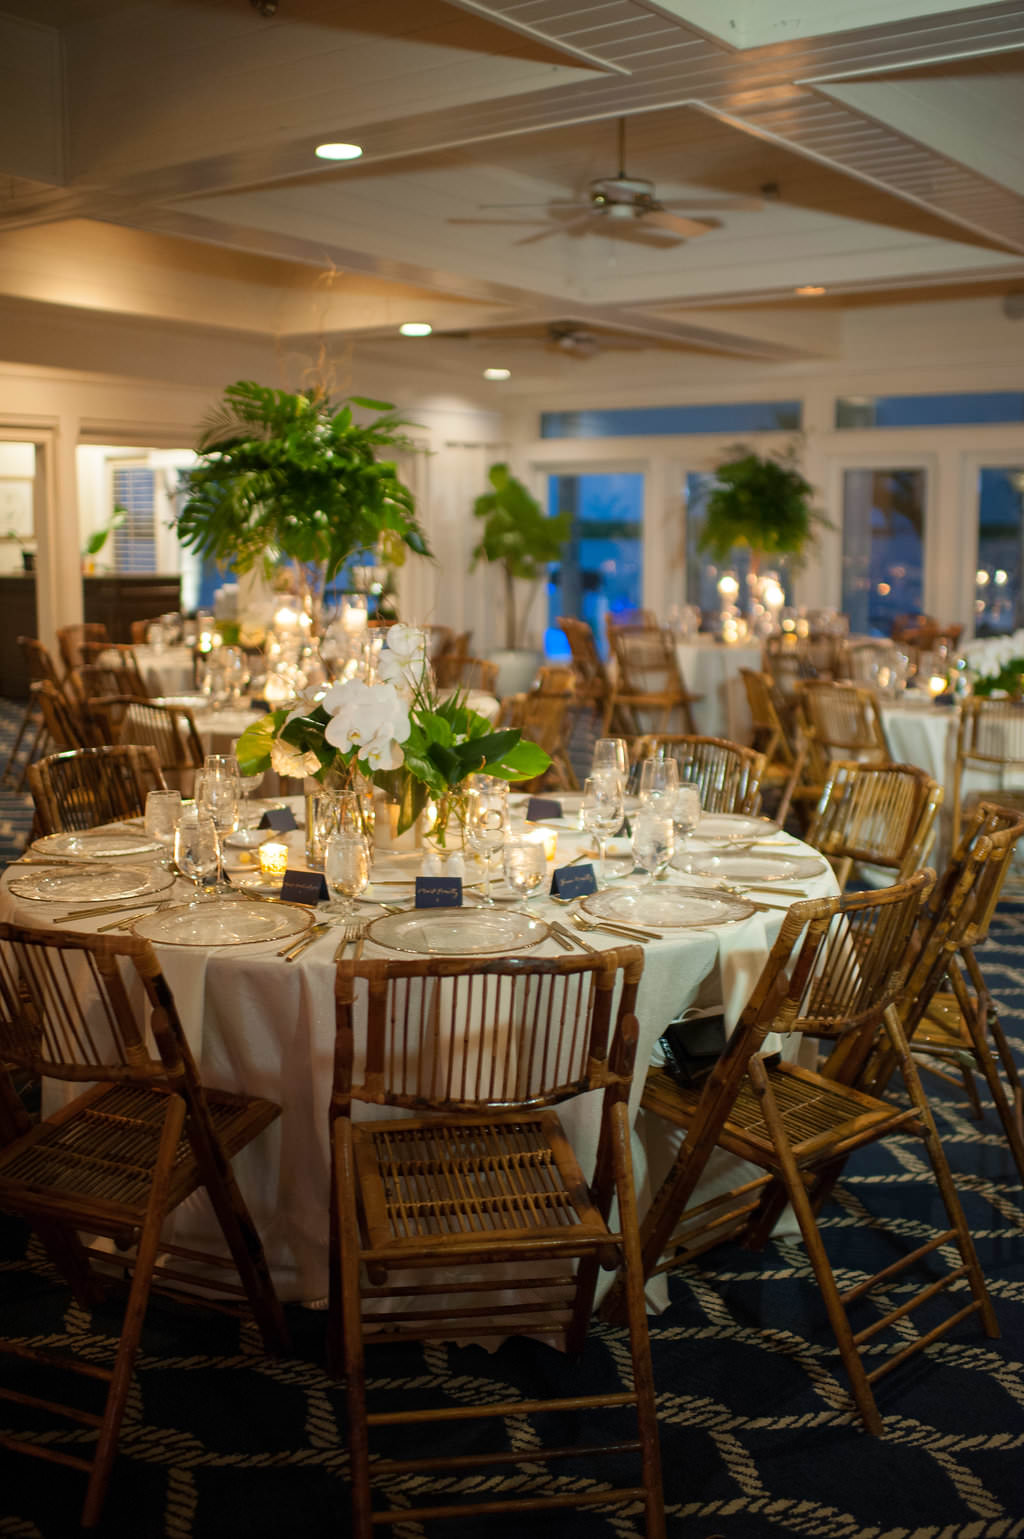 Indoor Wedding Reception Decor, Tall Glass Cylinder Vase with Tropical Green Leaves and Low Centerpiece with White Orchid Florals and Greenery and Wooden Brown Chairs | Tampa Wedding Planner Parties A La Carte | Clearwater Beach Wedding Venue Carlouel Yacht Club | St Pete Rentals Over The Top Linen Rentals and A Chair Affair